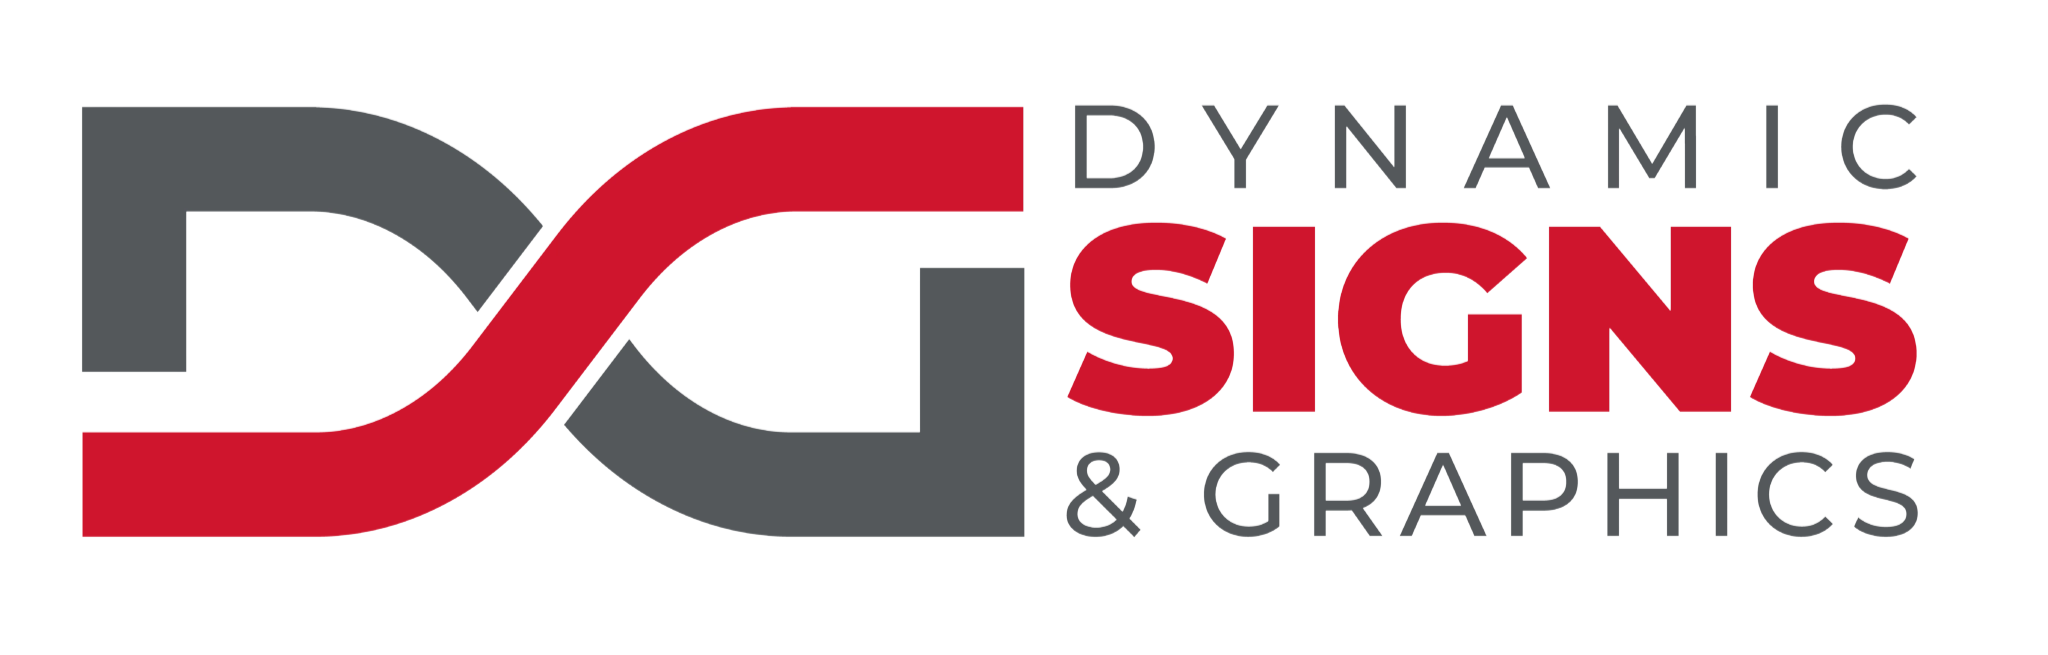 Dynamic Signs & Graphics